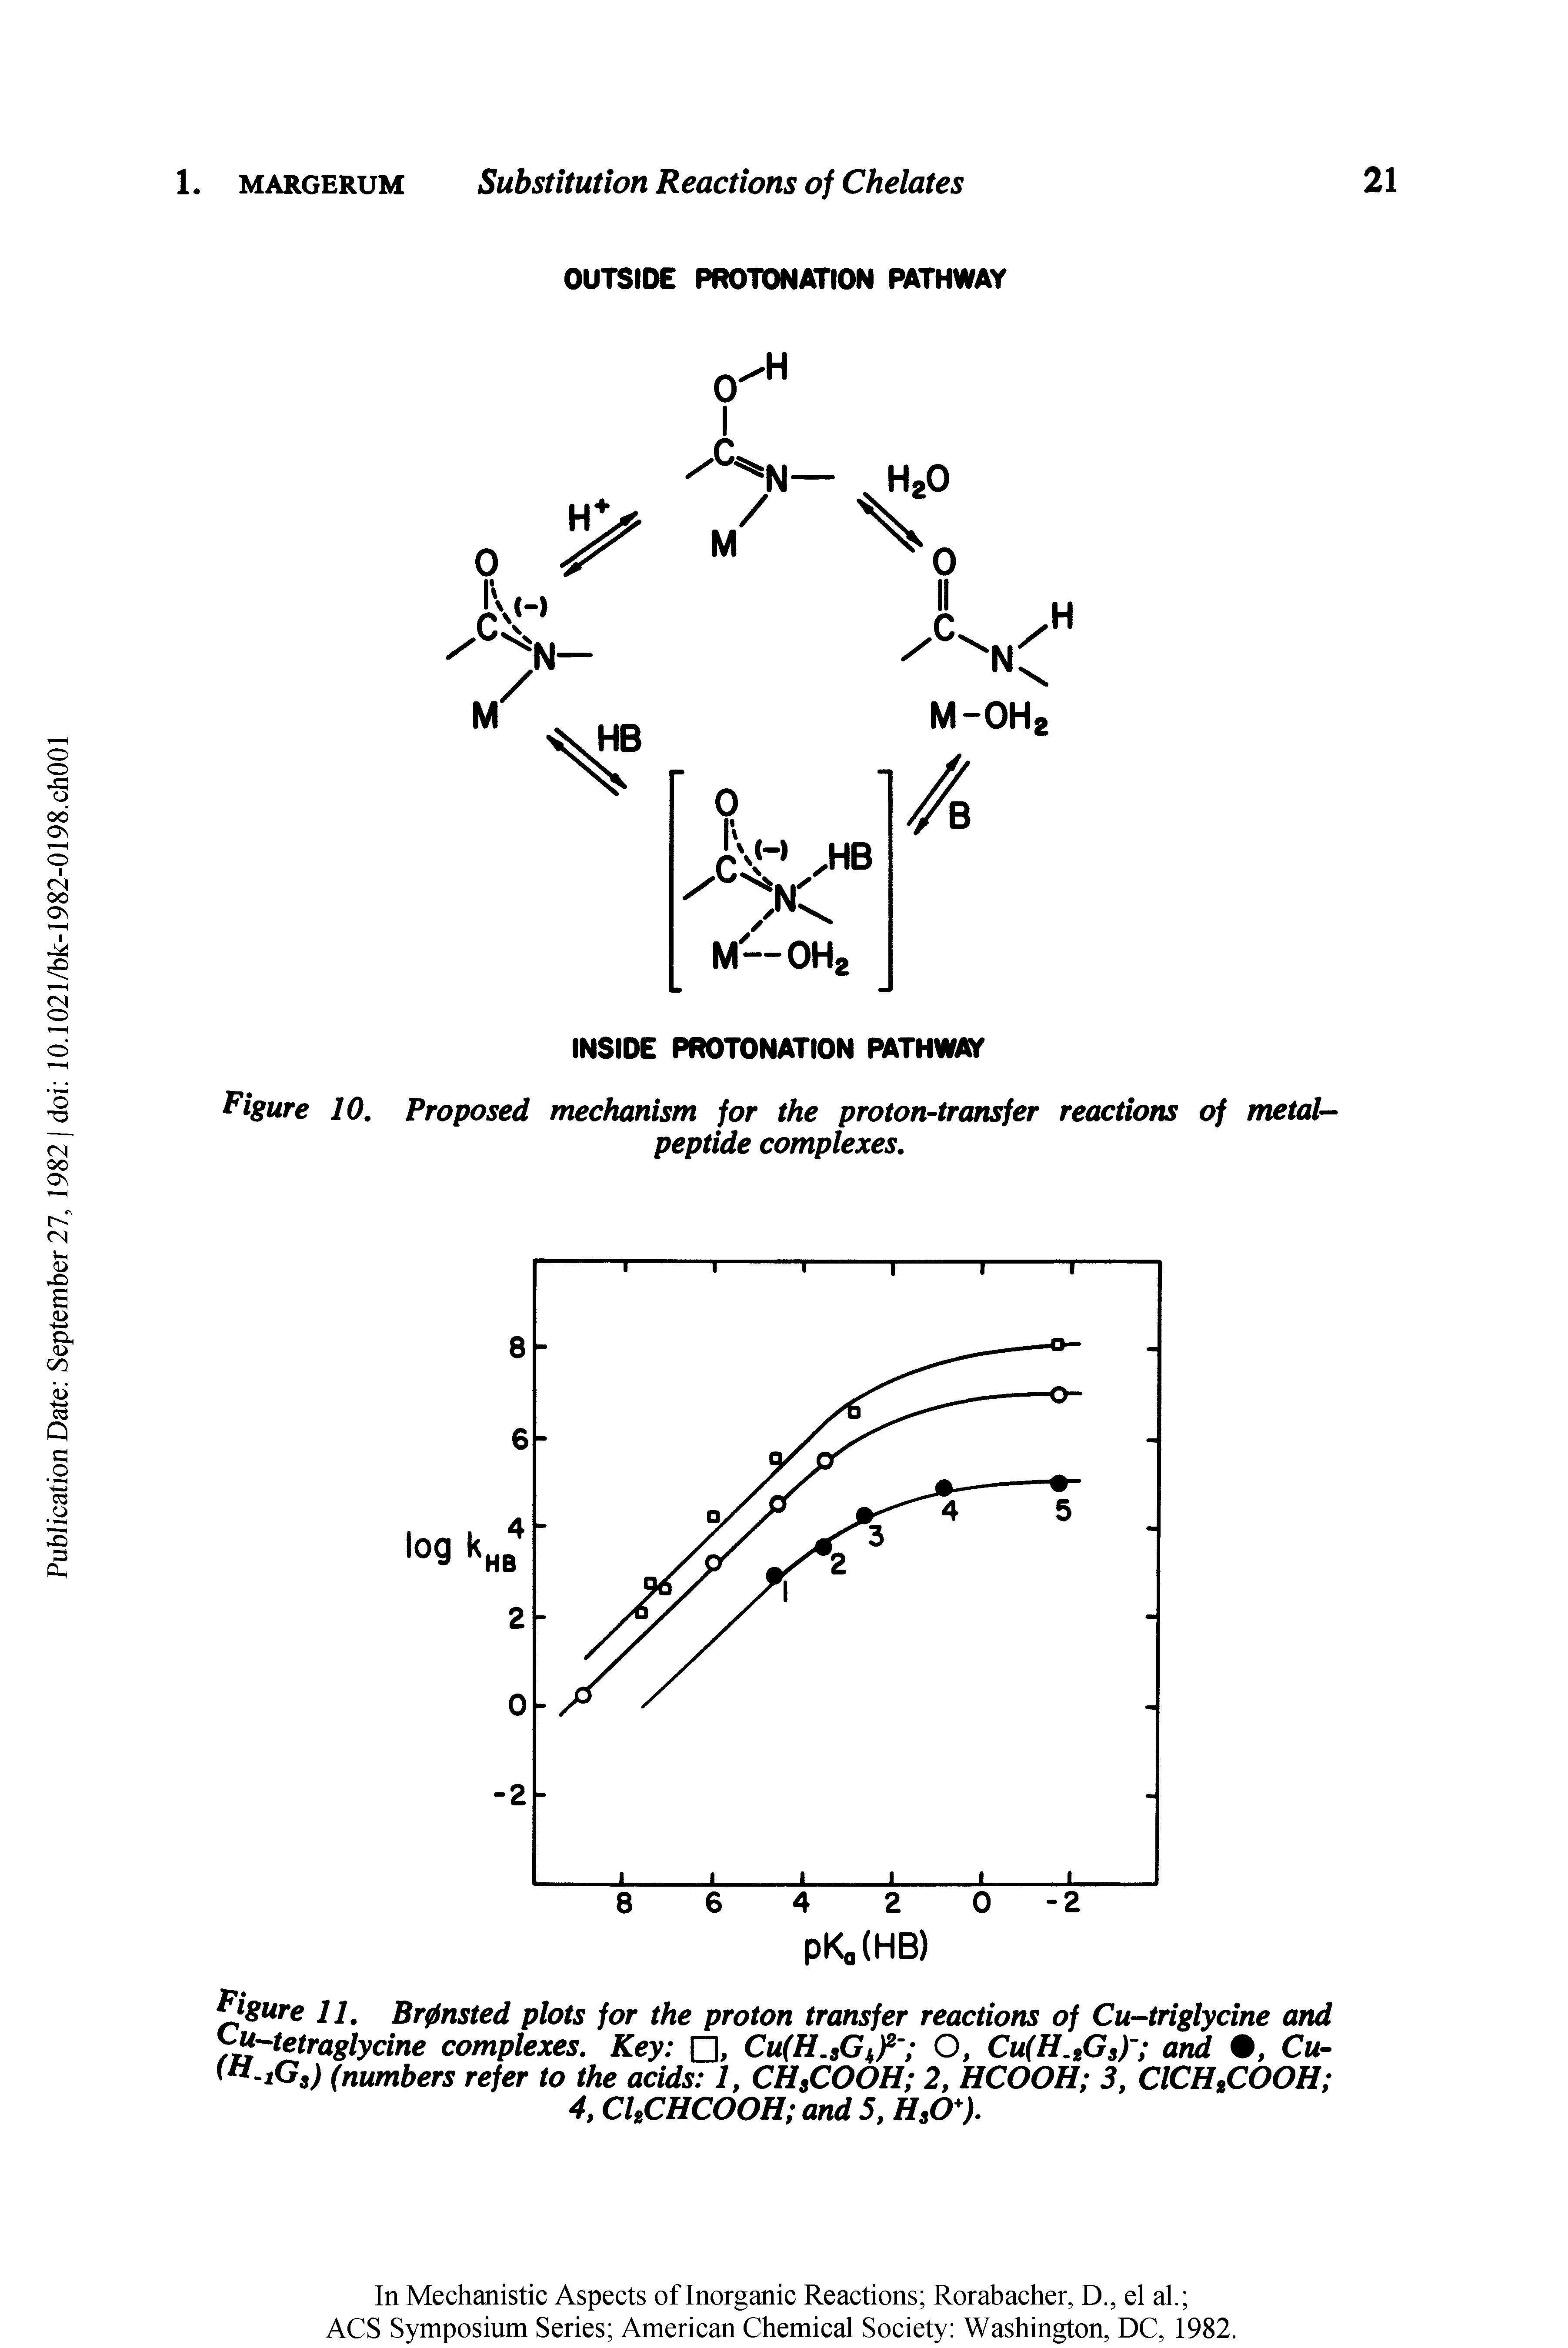 Figure 11. Brpnsted plots for the proton transfer reactions of Cu-triglycine and yu-tetraglycine complexes. Key , Cu(H, Gtf O, Cu(H.,G,) and , Cu- - G,) (numbers refer to the acids 1, CH COOH 2, HCOOH 3, ClCH,COOH 4, CUCHCOOH and 5, H,0 ).